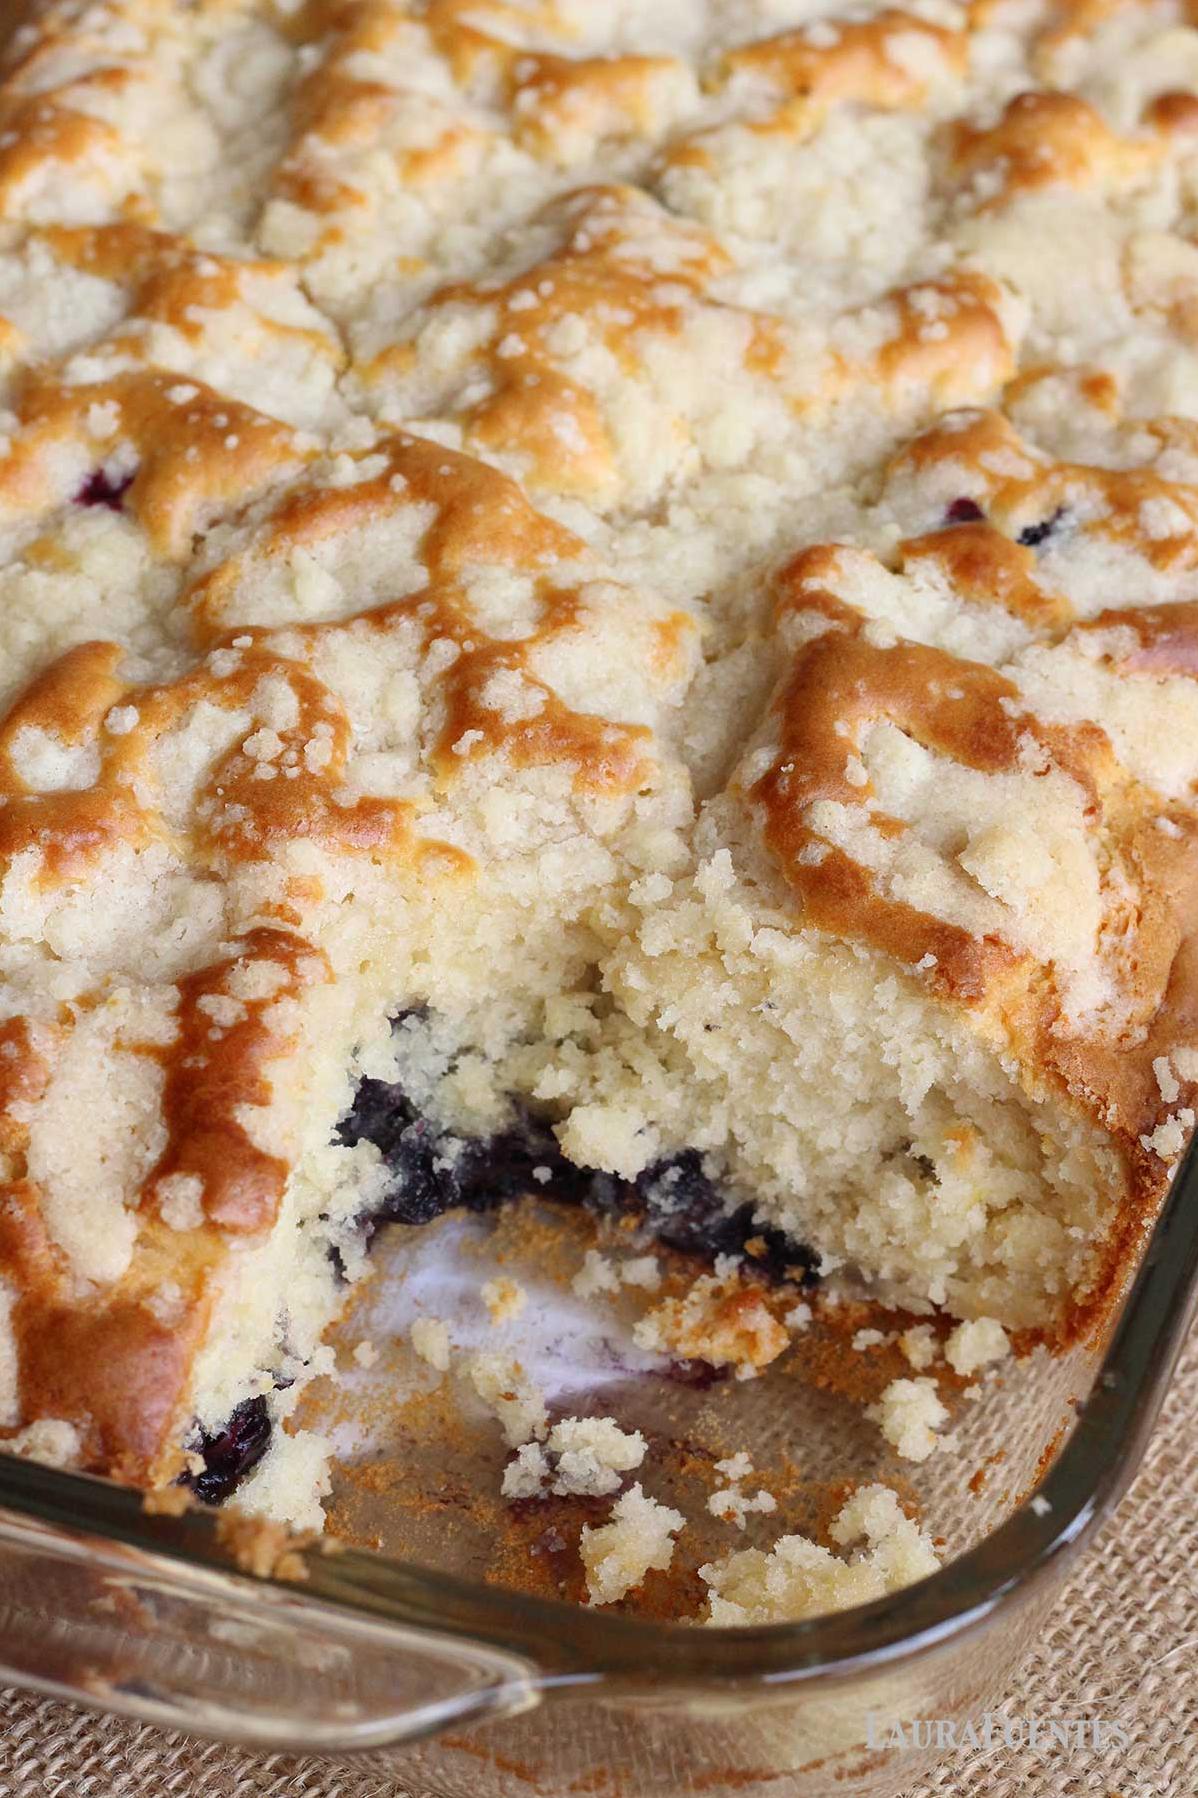  This cake has a perfect balance of sweetness and tartness thanks to the juicy blueberries.